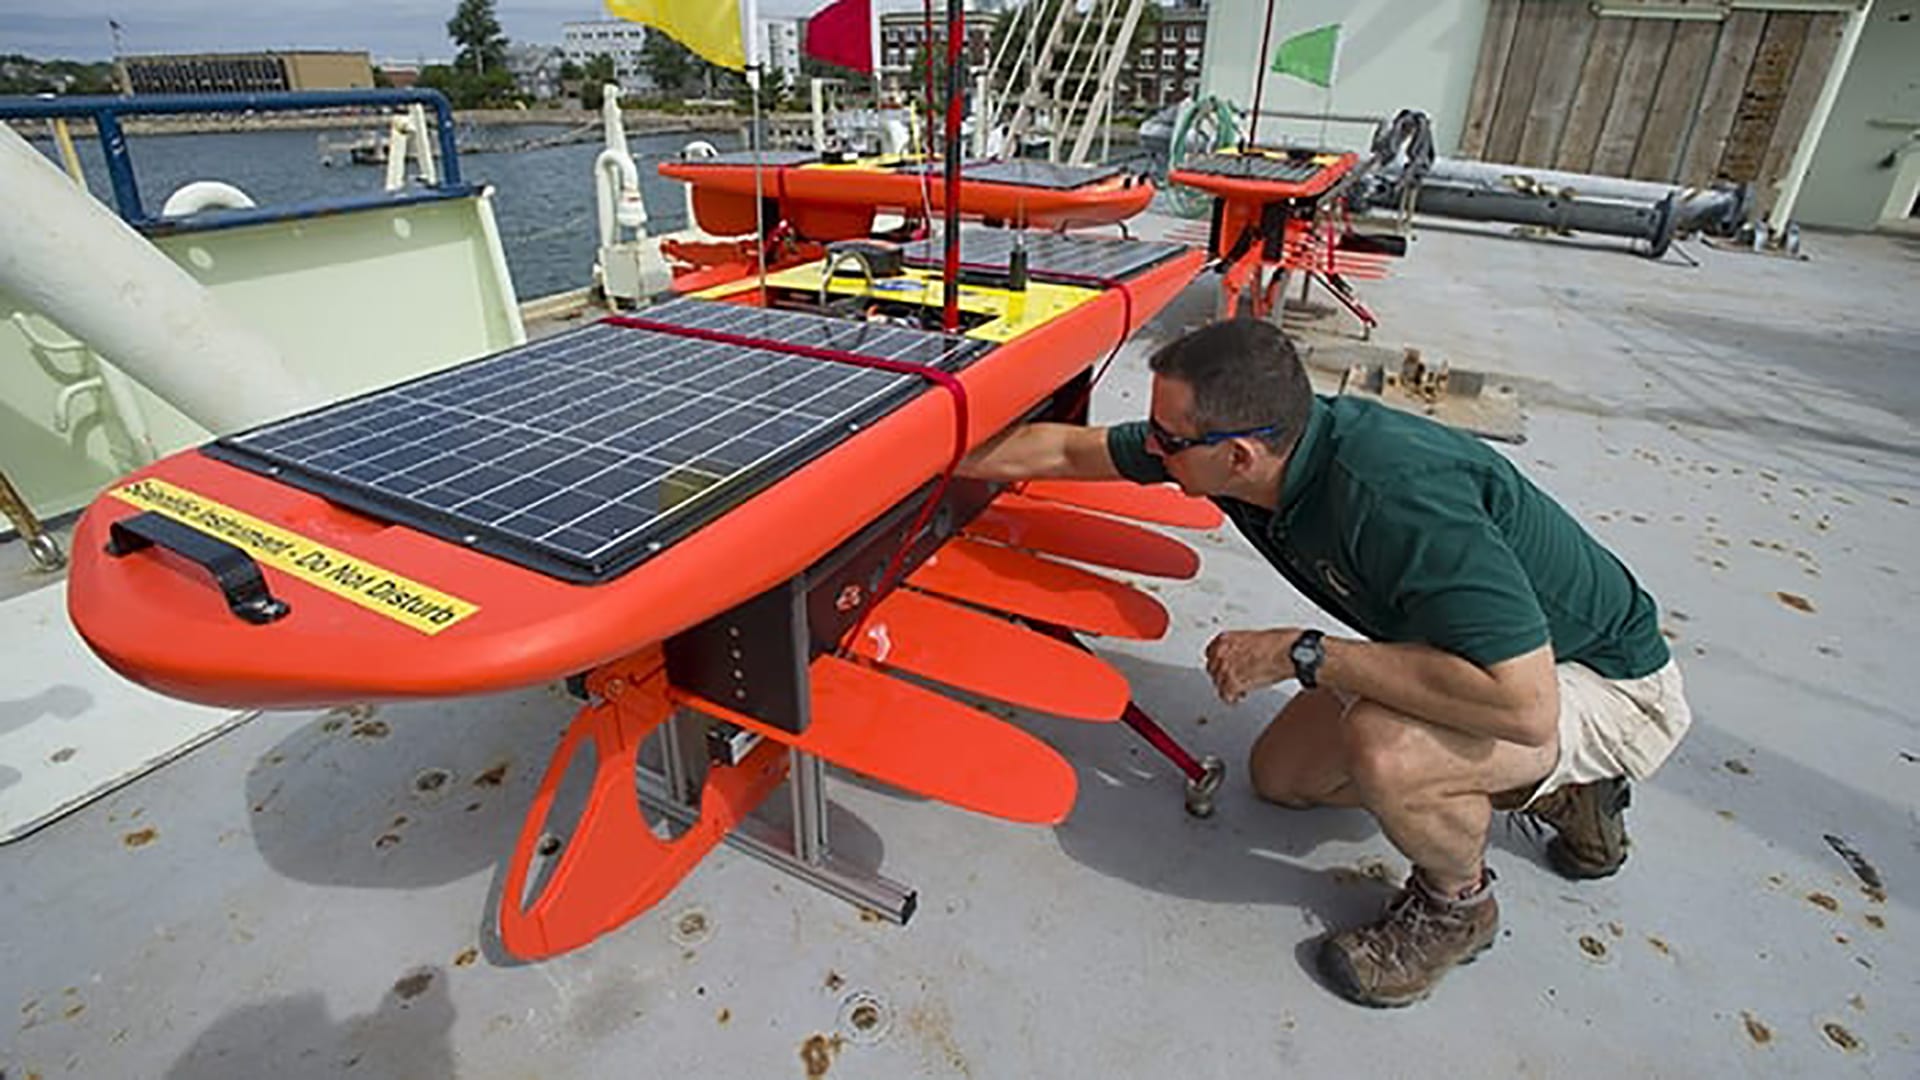 Former WHOI physical oceanographer Dave Fratantoni inspects a Wave Glider on the deck of R/V Knorr in 2012. The Wave Glider uses wave motion to propel itself through the ocean and solar-charged batteries to power its data collection sensors. (Tom Kleindinst, Woods Hole Oceanographic Institution)